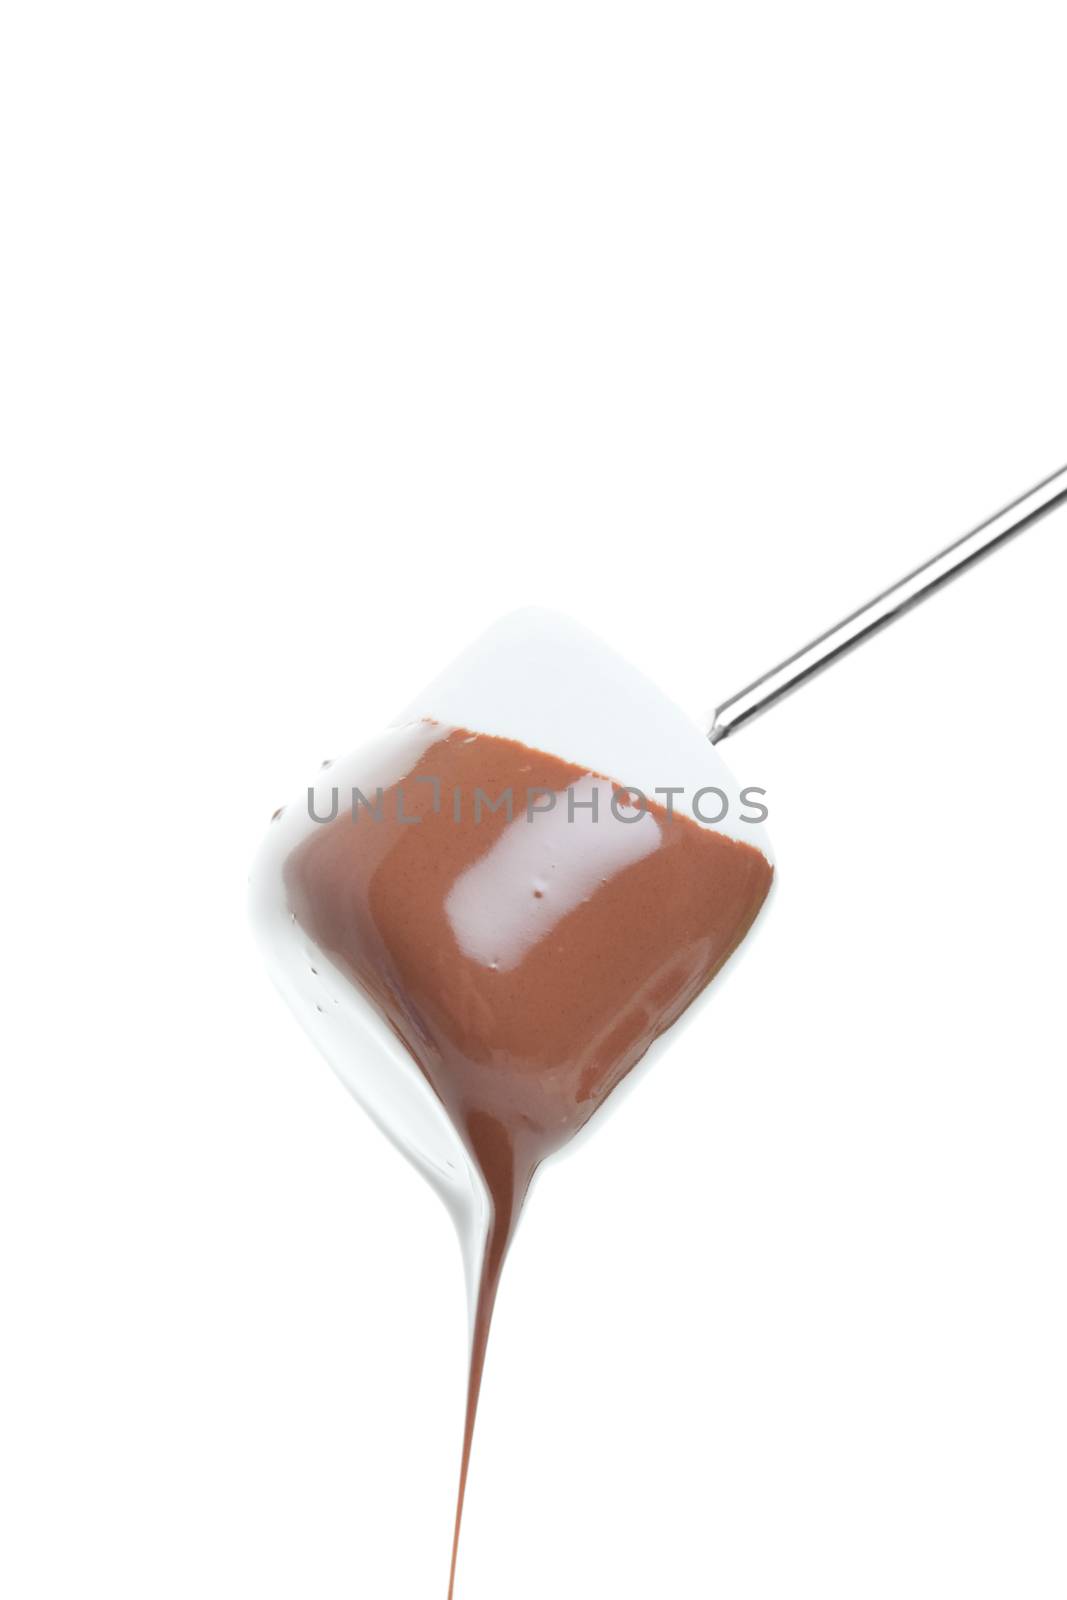 A marshmallow that has just been freshly dipped in warm milk chocolate.  Shot on white background.